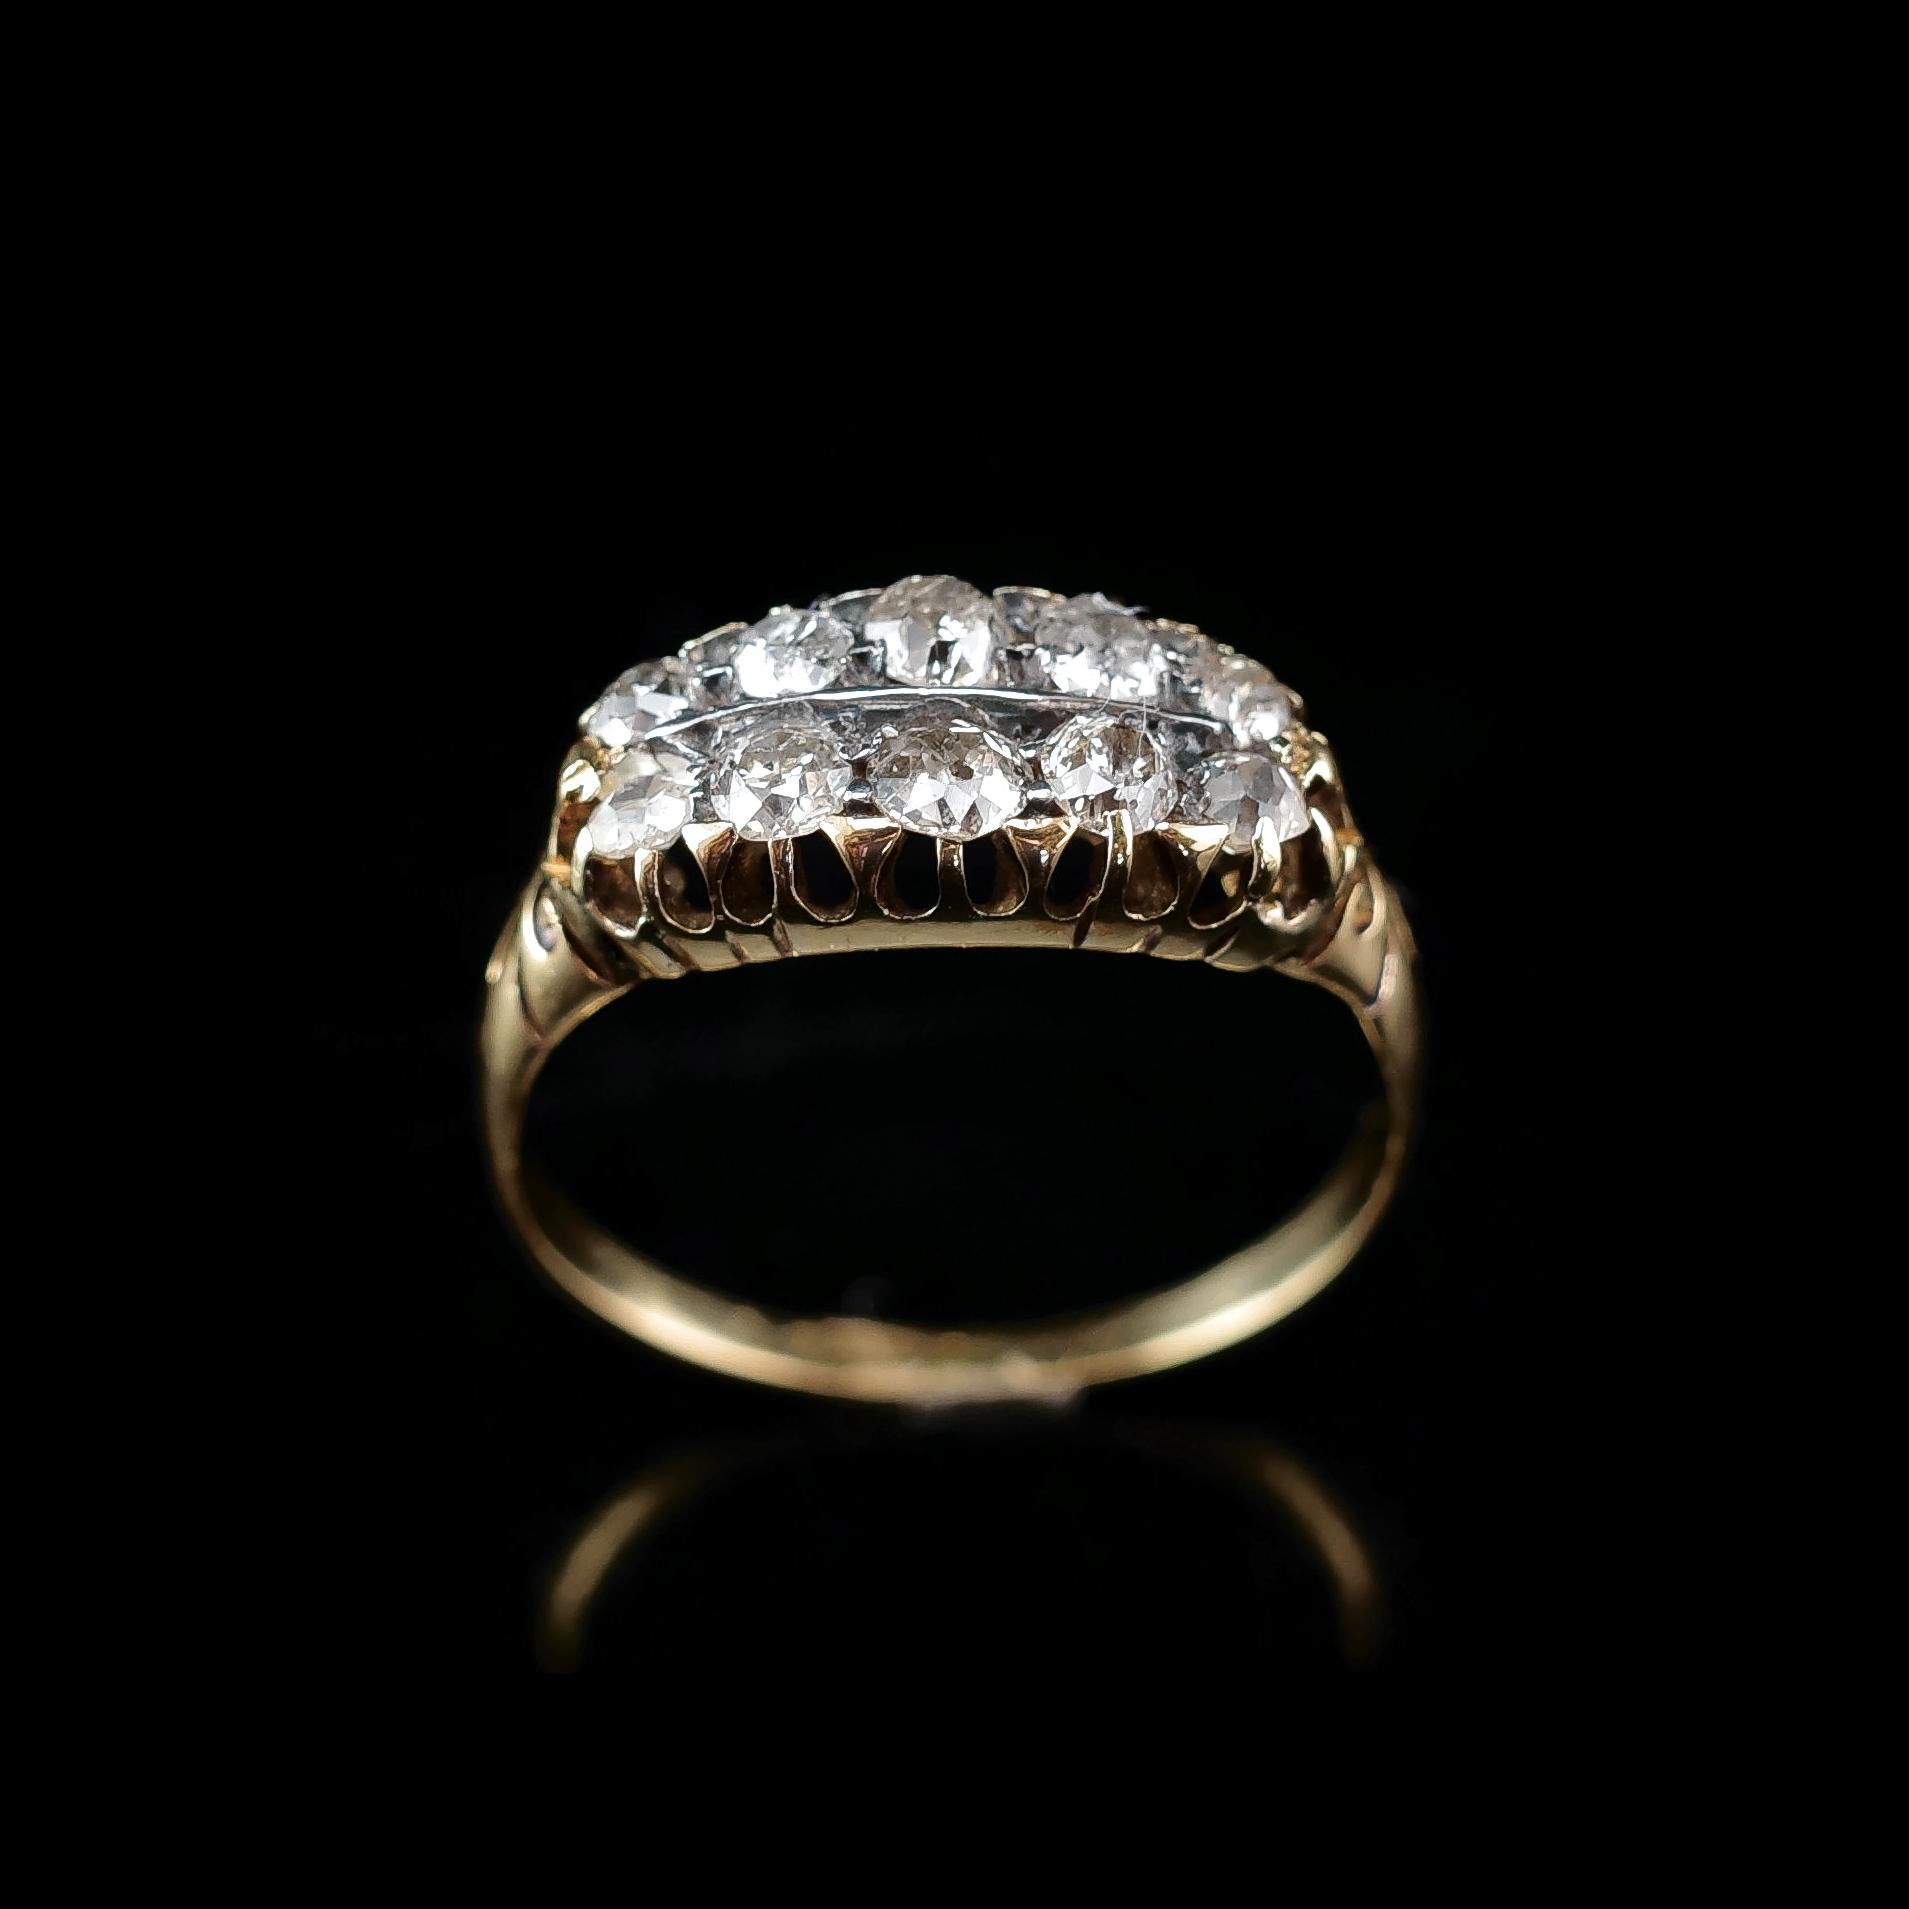 Antique Victorian 18K Gold Diamond Ring Old Cut Two Row Boat-Shaped, c.1890 In Good Condition For Sale In London, GB